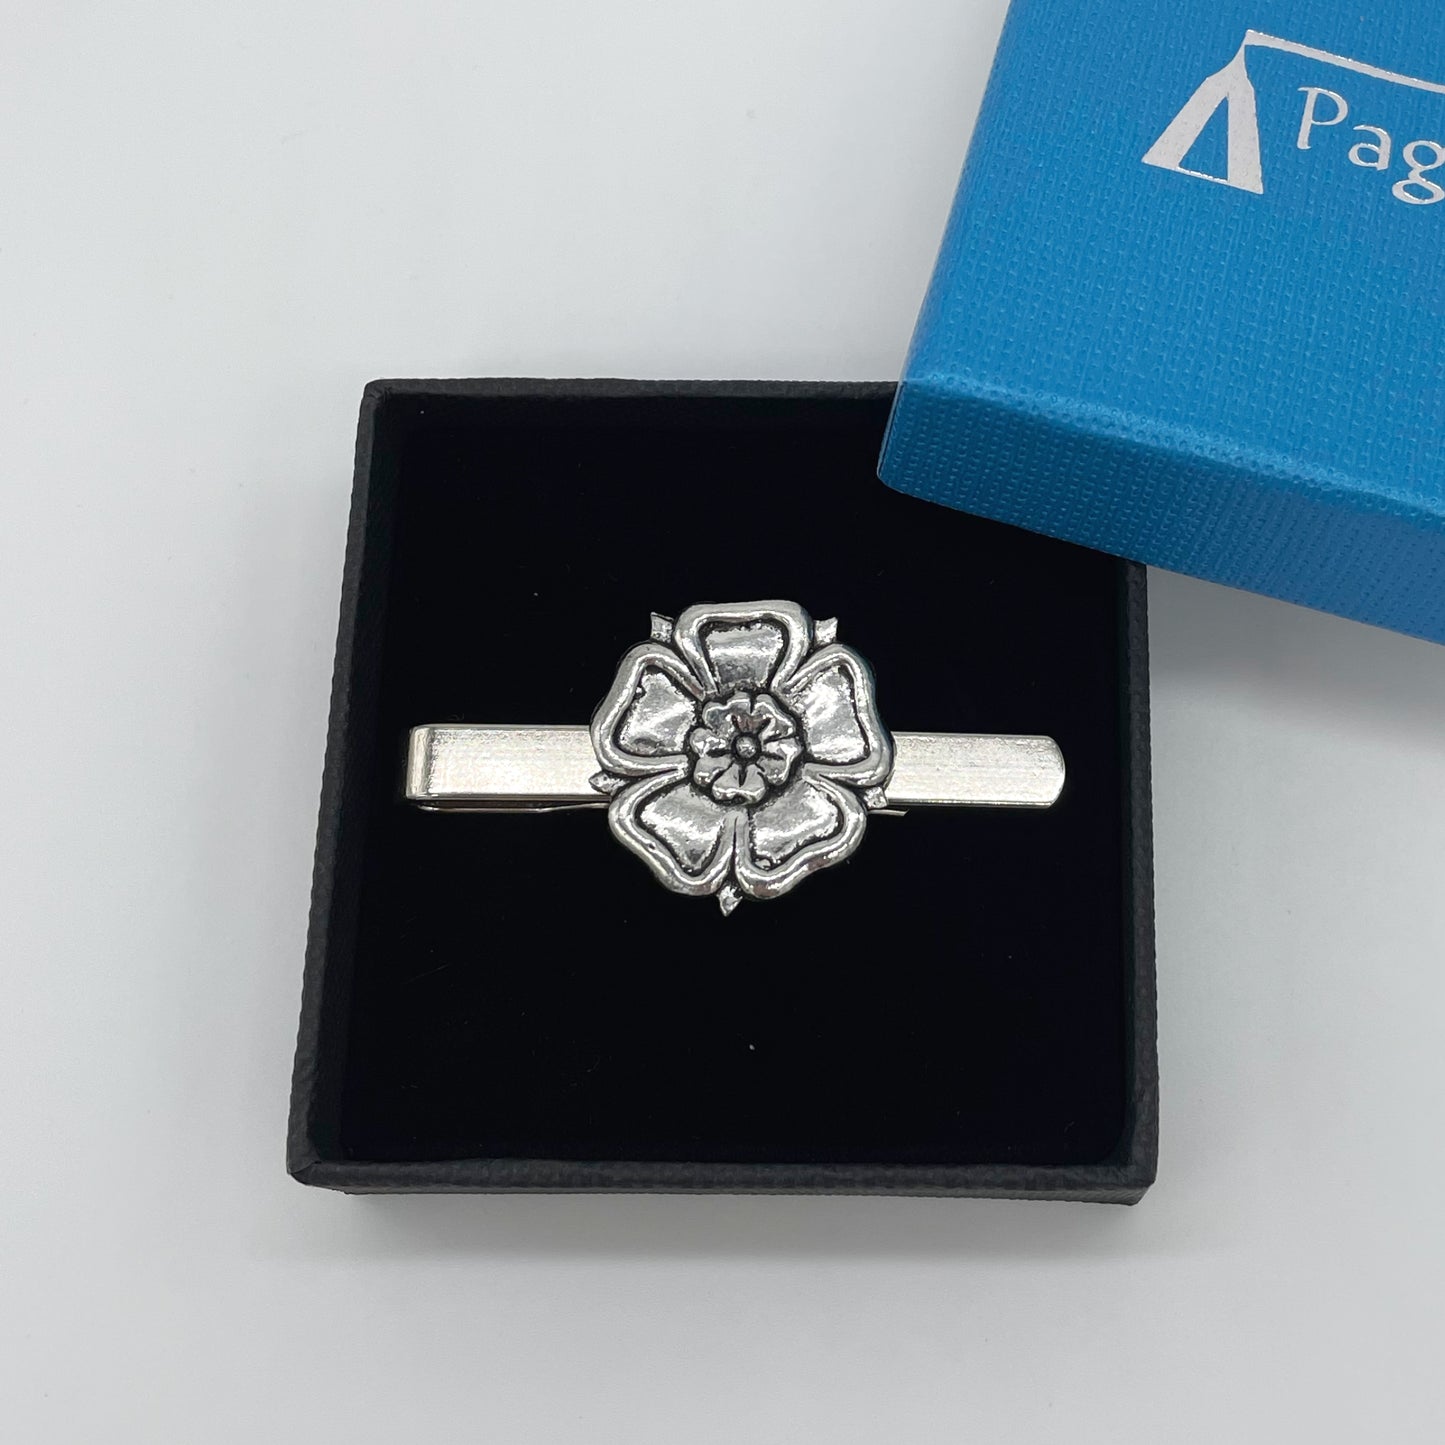 Yorkshire Rose Pewter Tie Clip - The Great Yorkshire Shop